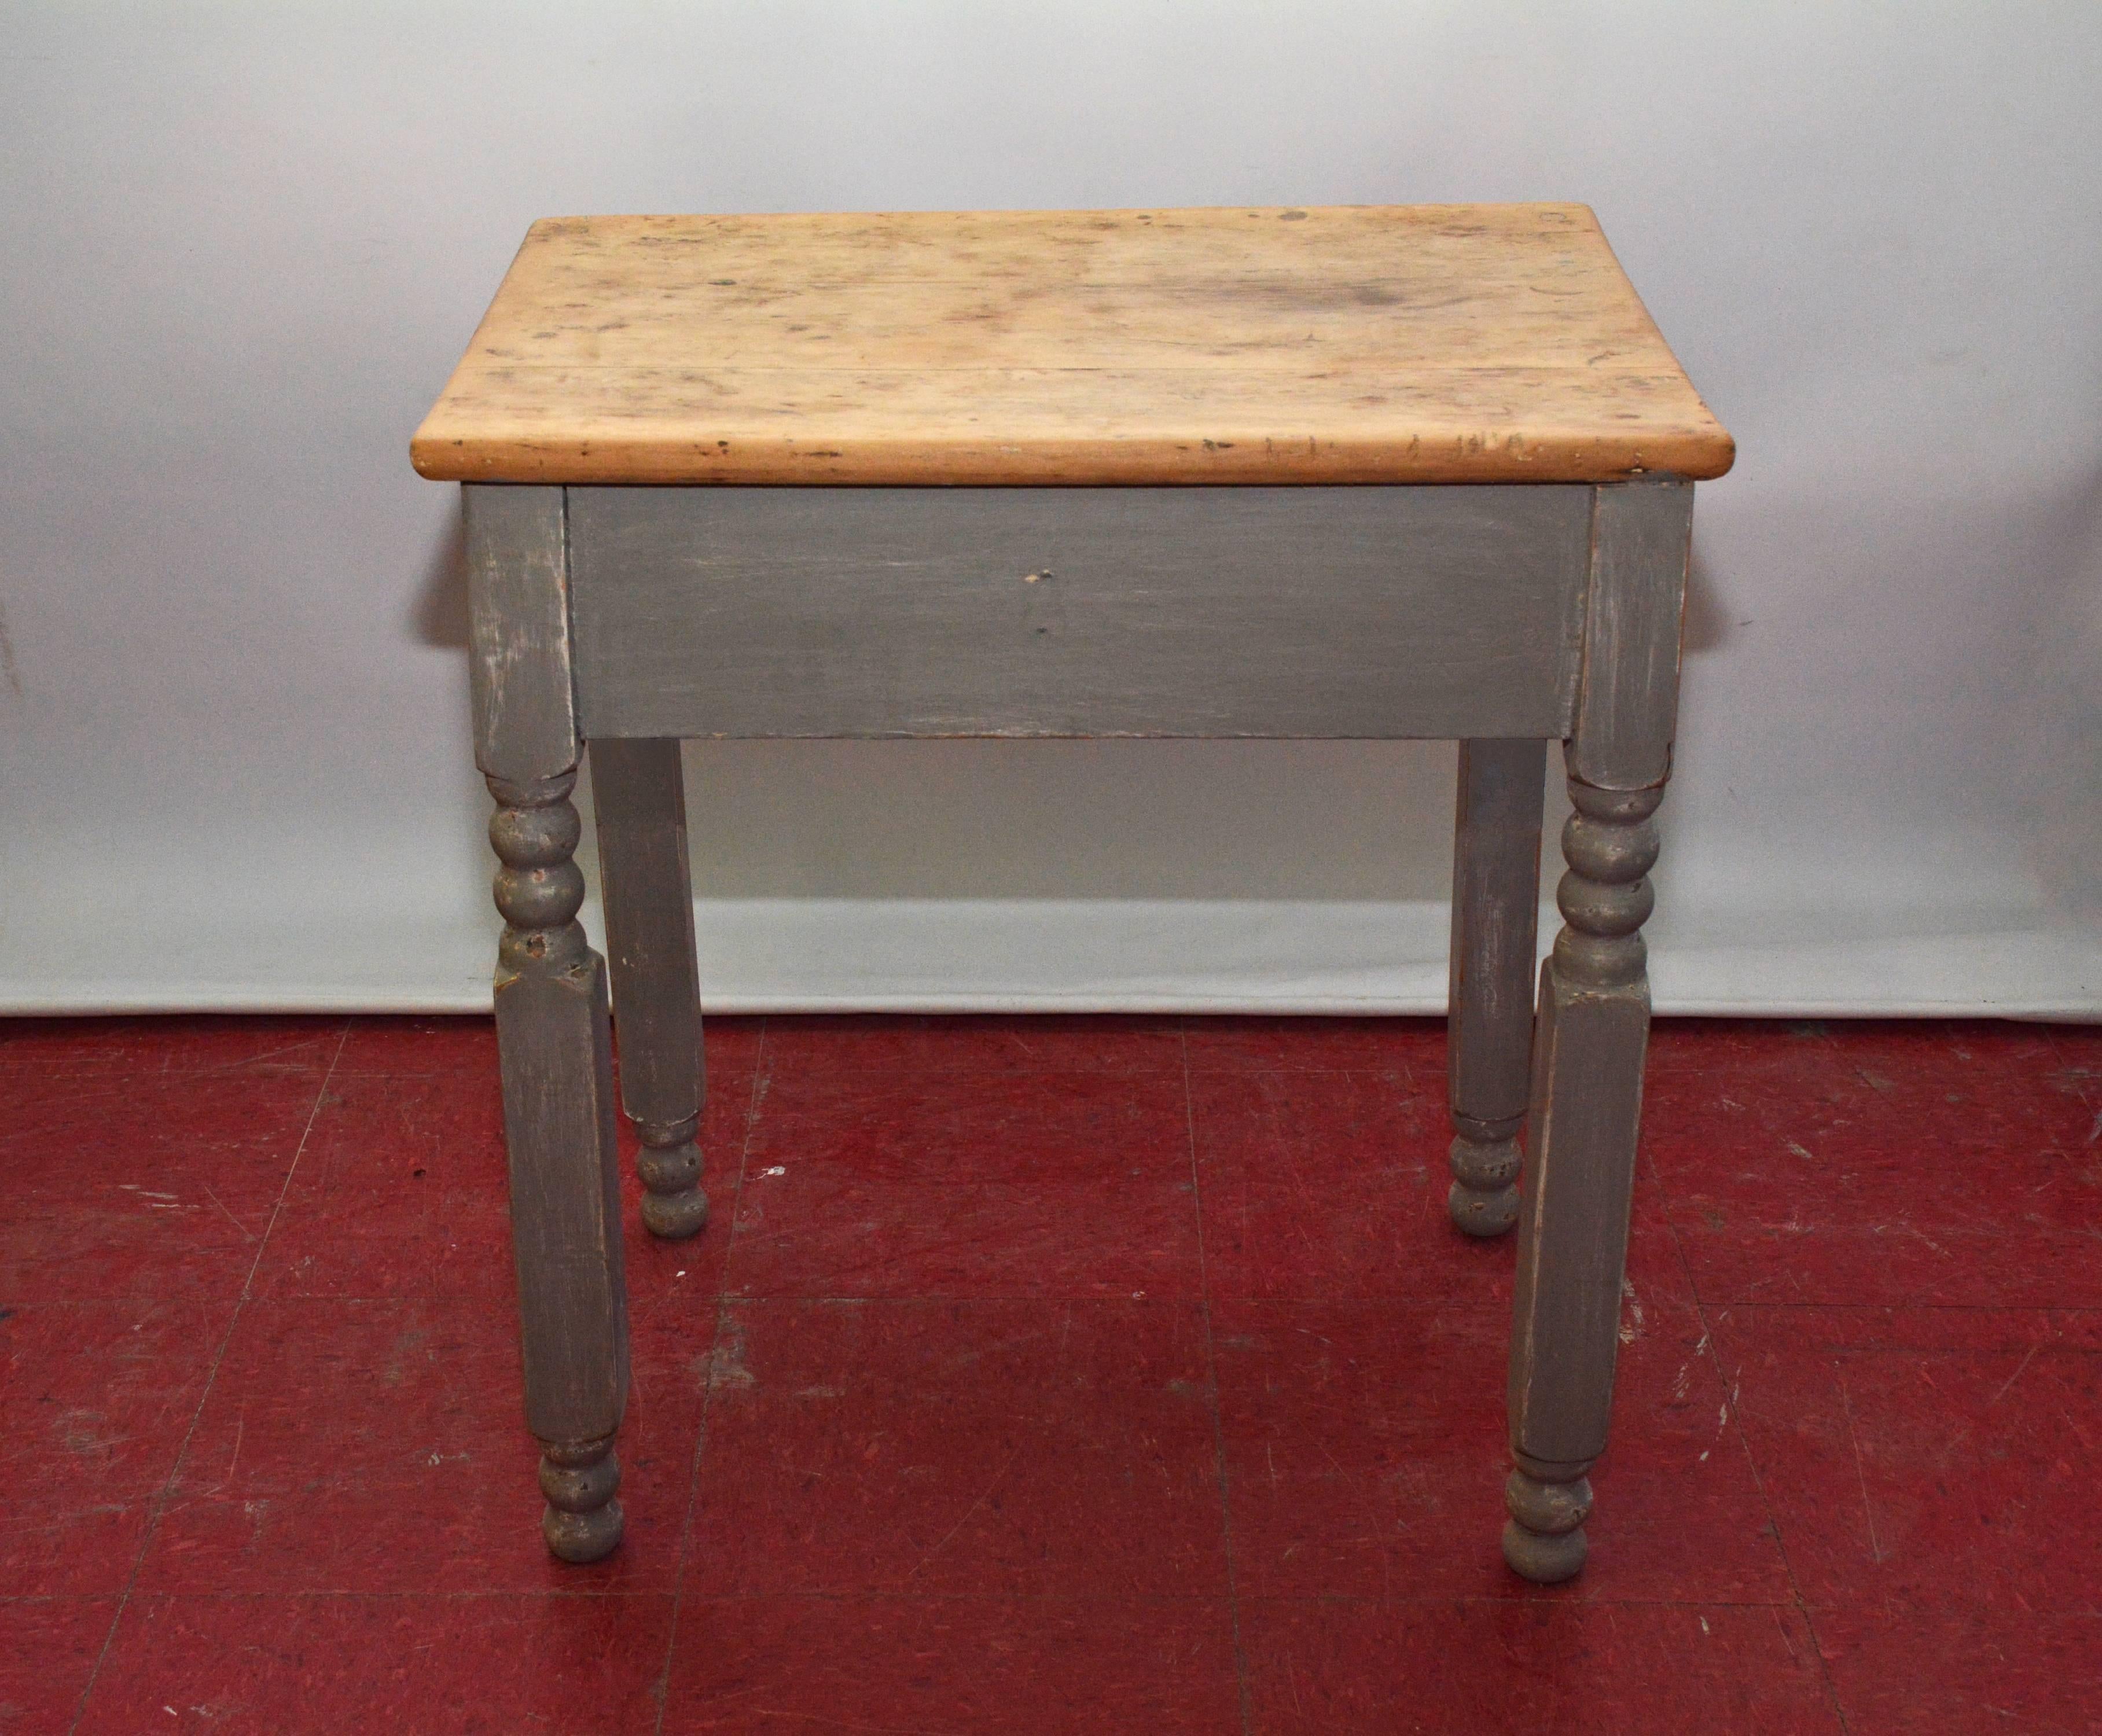 The rustic pine table or nightstand has a base with rubbed gray paint, partially turned legs and a single drawer. The top is natural pinewood.